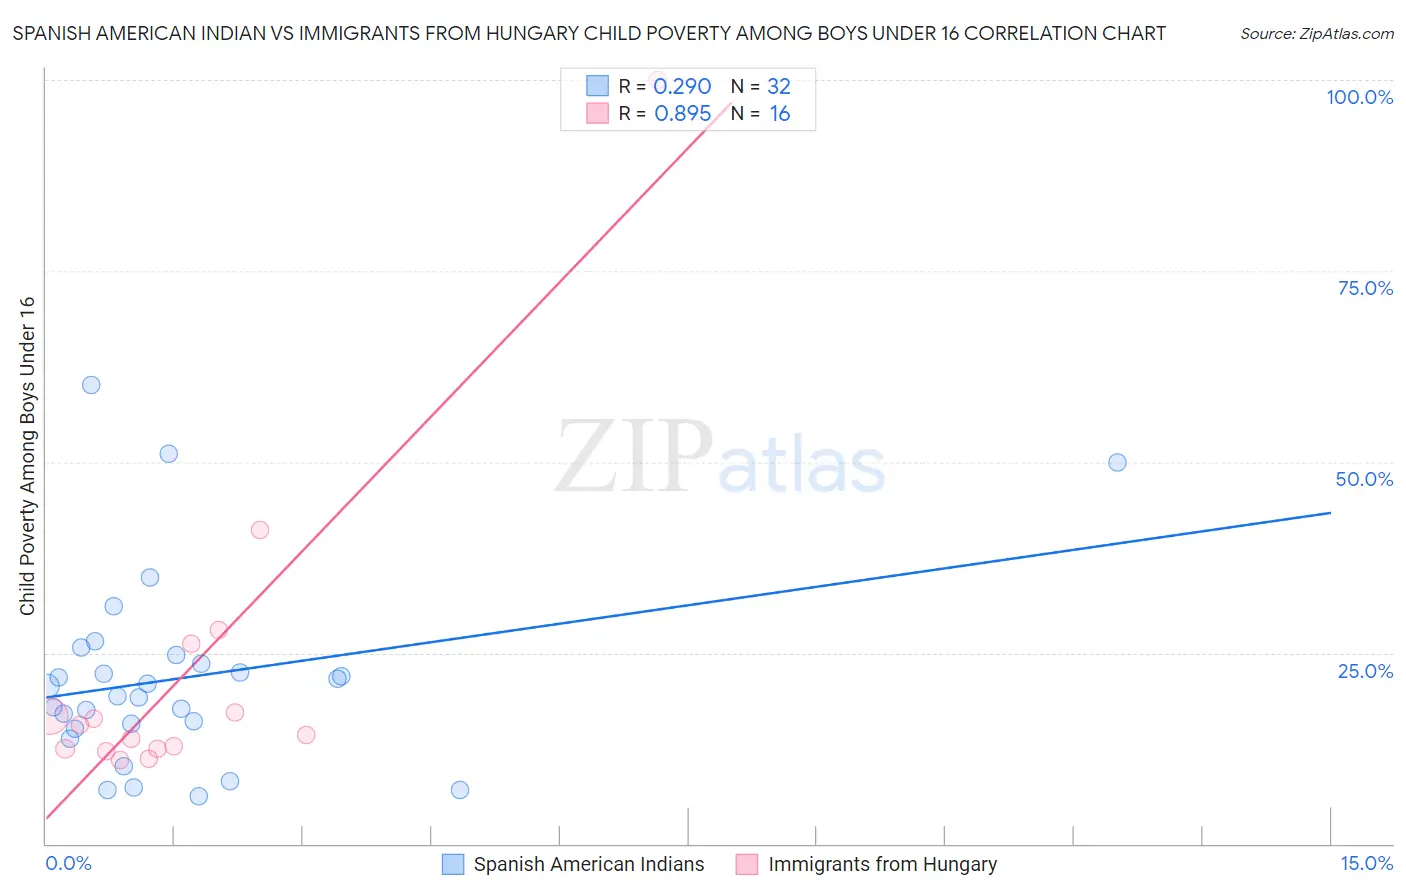 Spanish American Indian vs Immigrants from Hungary Child Poverty Among Boys Under 16